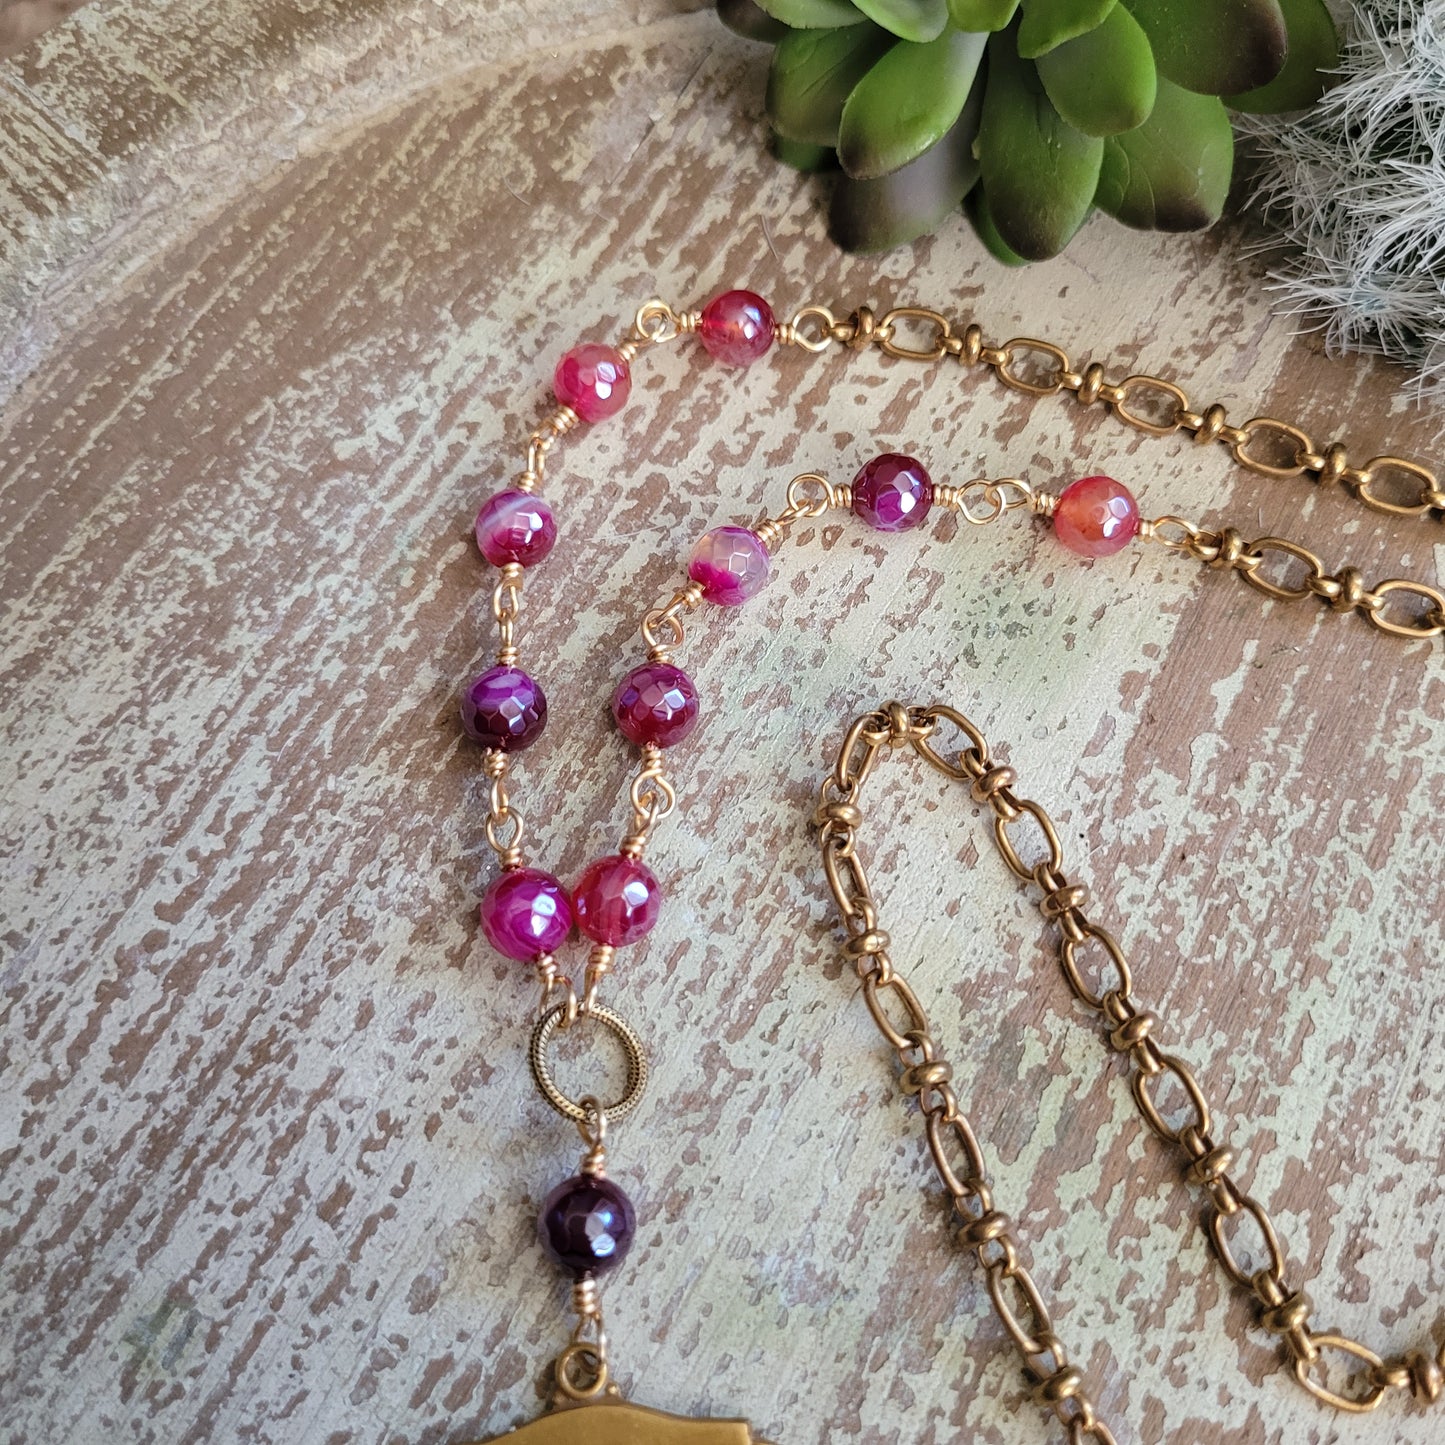 Strength and Grace boho chic necklace, vintage shooting medal with angel statue, pink mystic agate beads